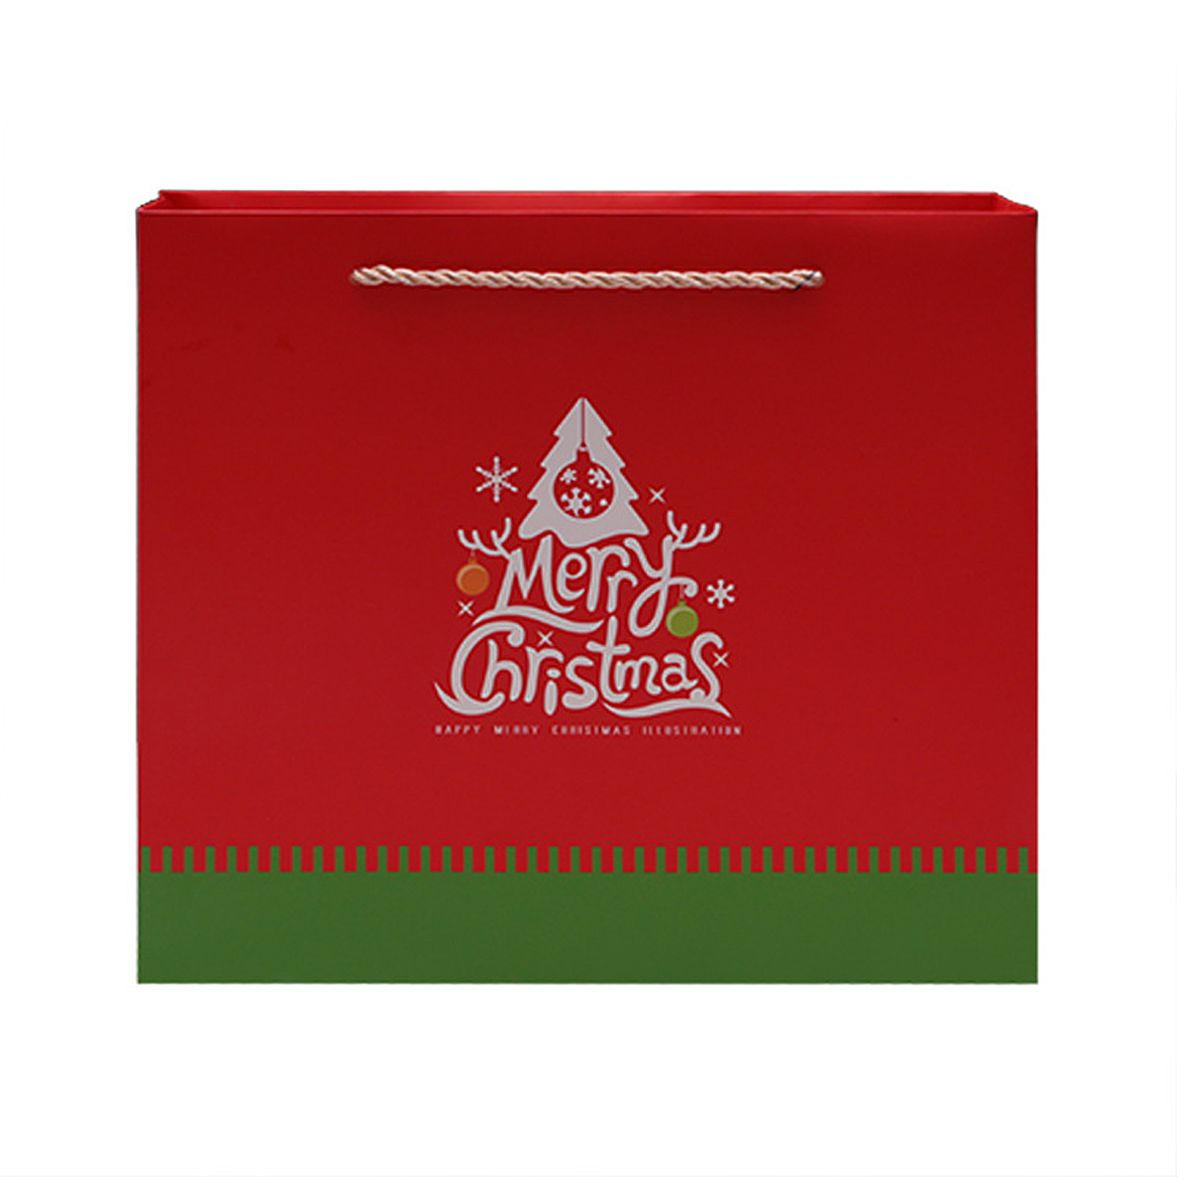 3227511cm-Christmas-Eve-Decorations-Gift-Box-Stereo-Pattern-Inside-With-Bag-Hard-Paper-1596606